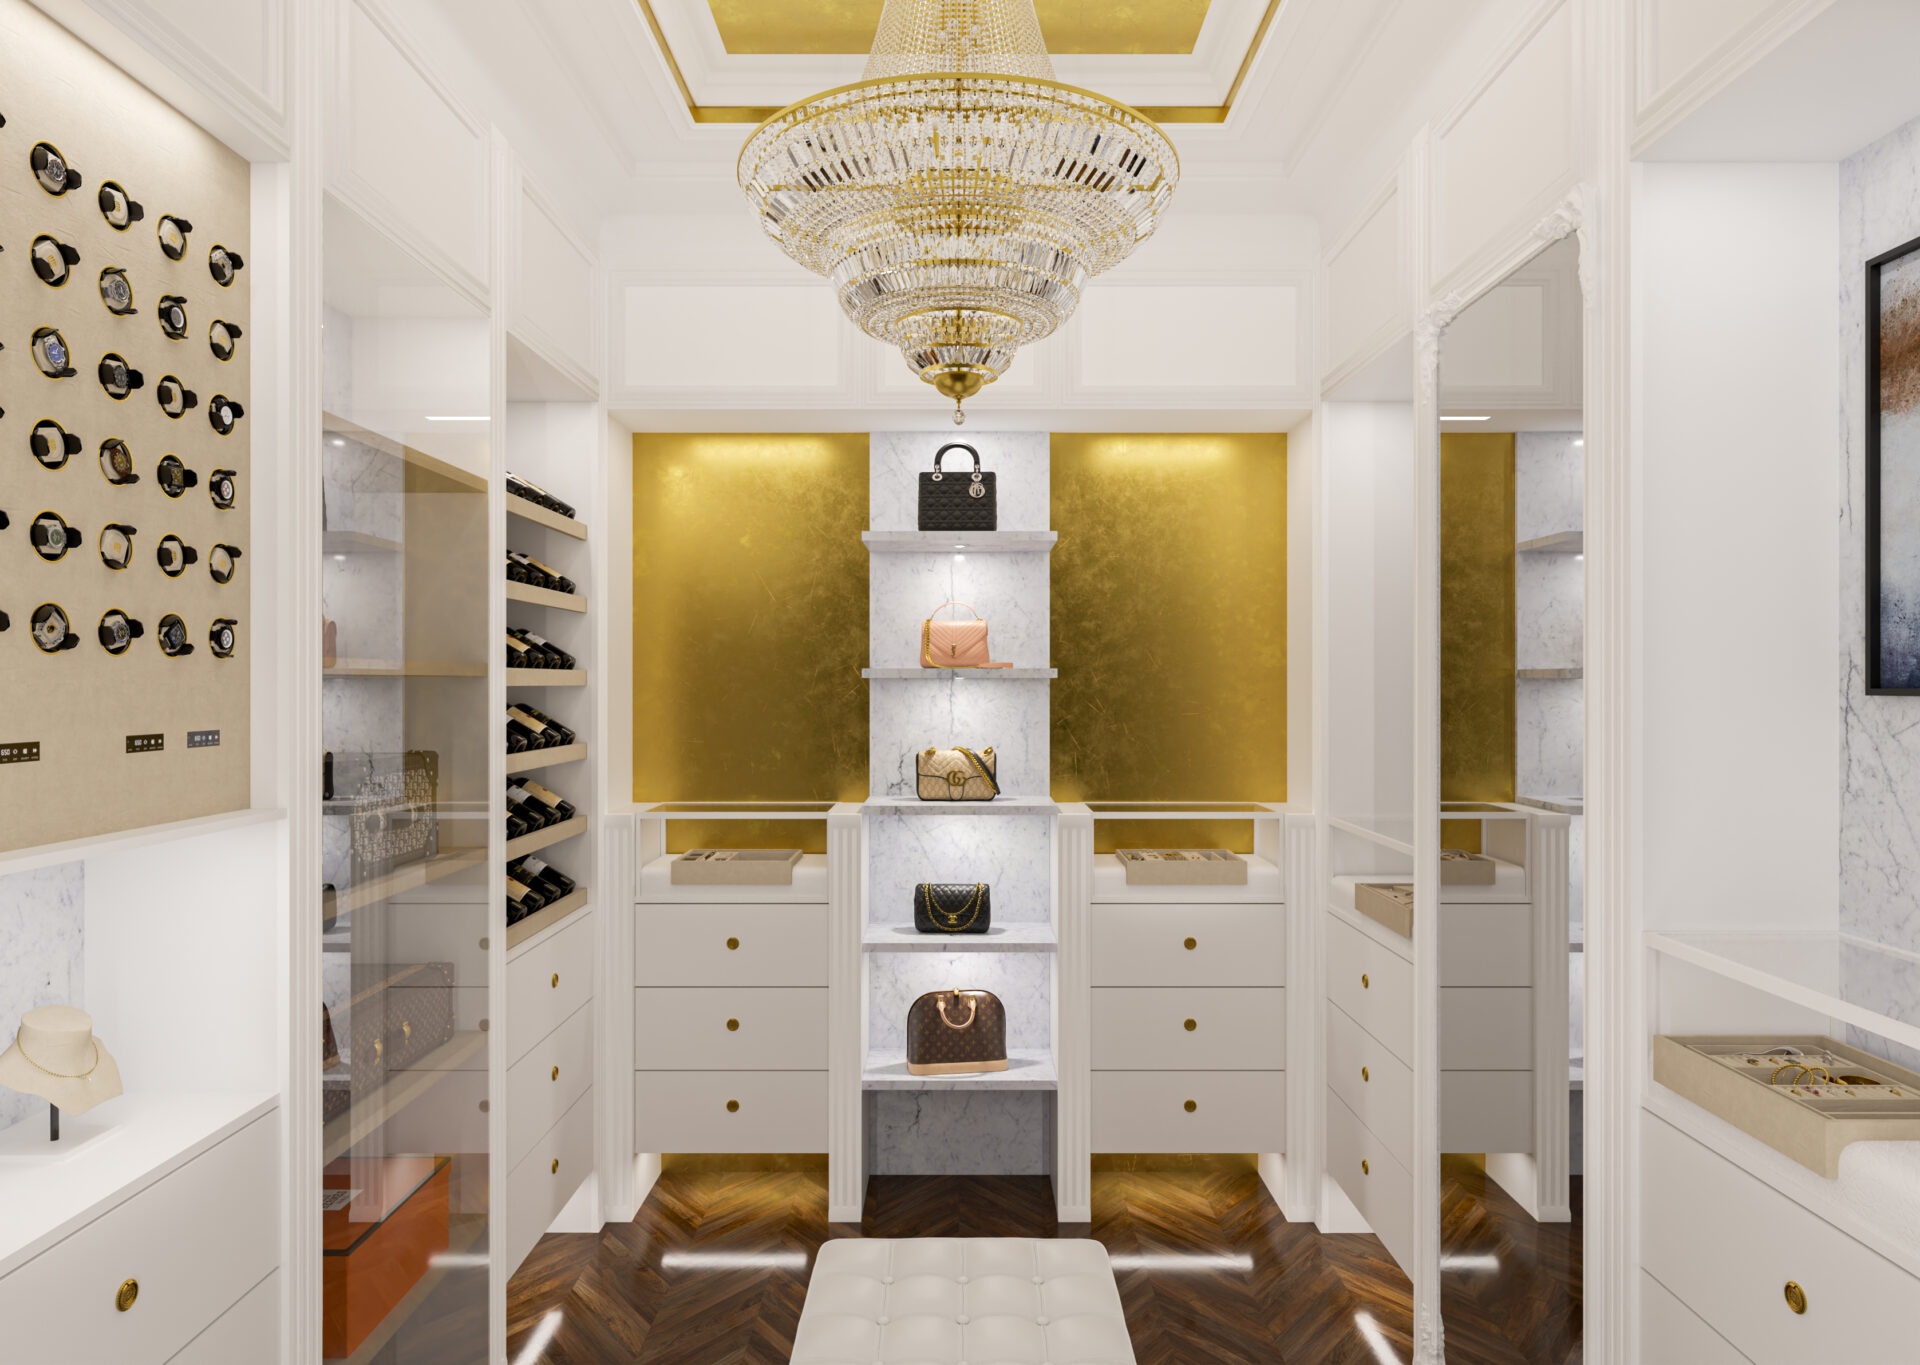 THE PRIVATE PALACE "GOLD" - a bright luxury private vault room with gold details - View 1